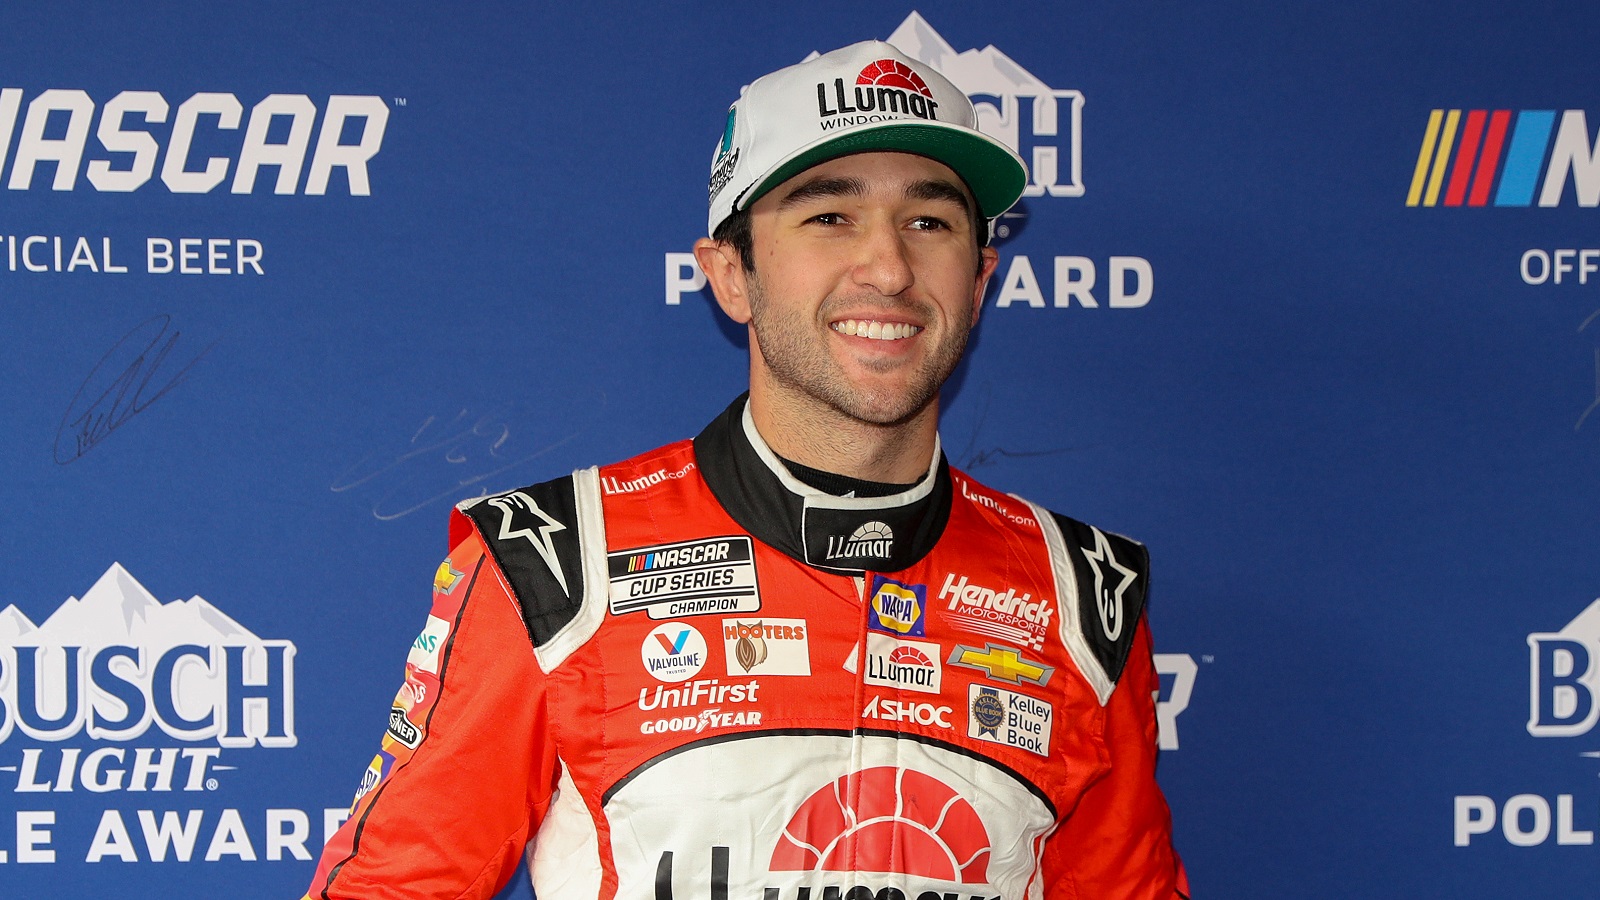 Chase Elliott poses for photos after winning the pole award during qualifying for the NASCAR Cup Series Blue-Emu Maximum Pain Relief 400 at Martinsville Speedway on April 8, 2022.